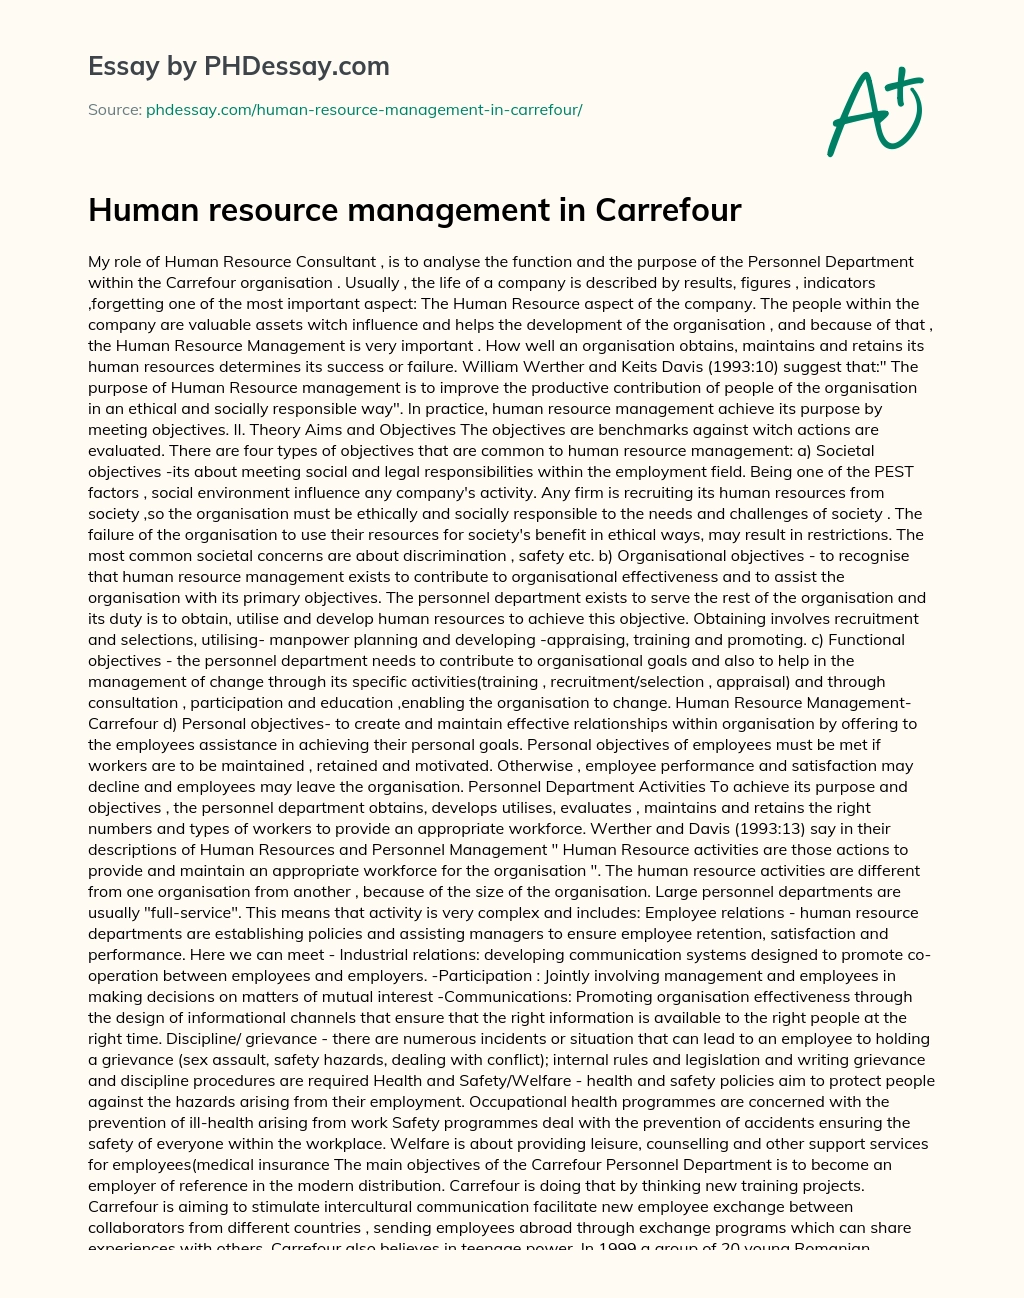 Human resource management in Carrefour essay